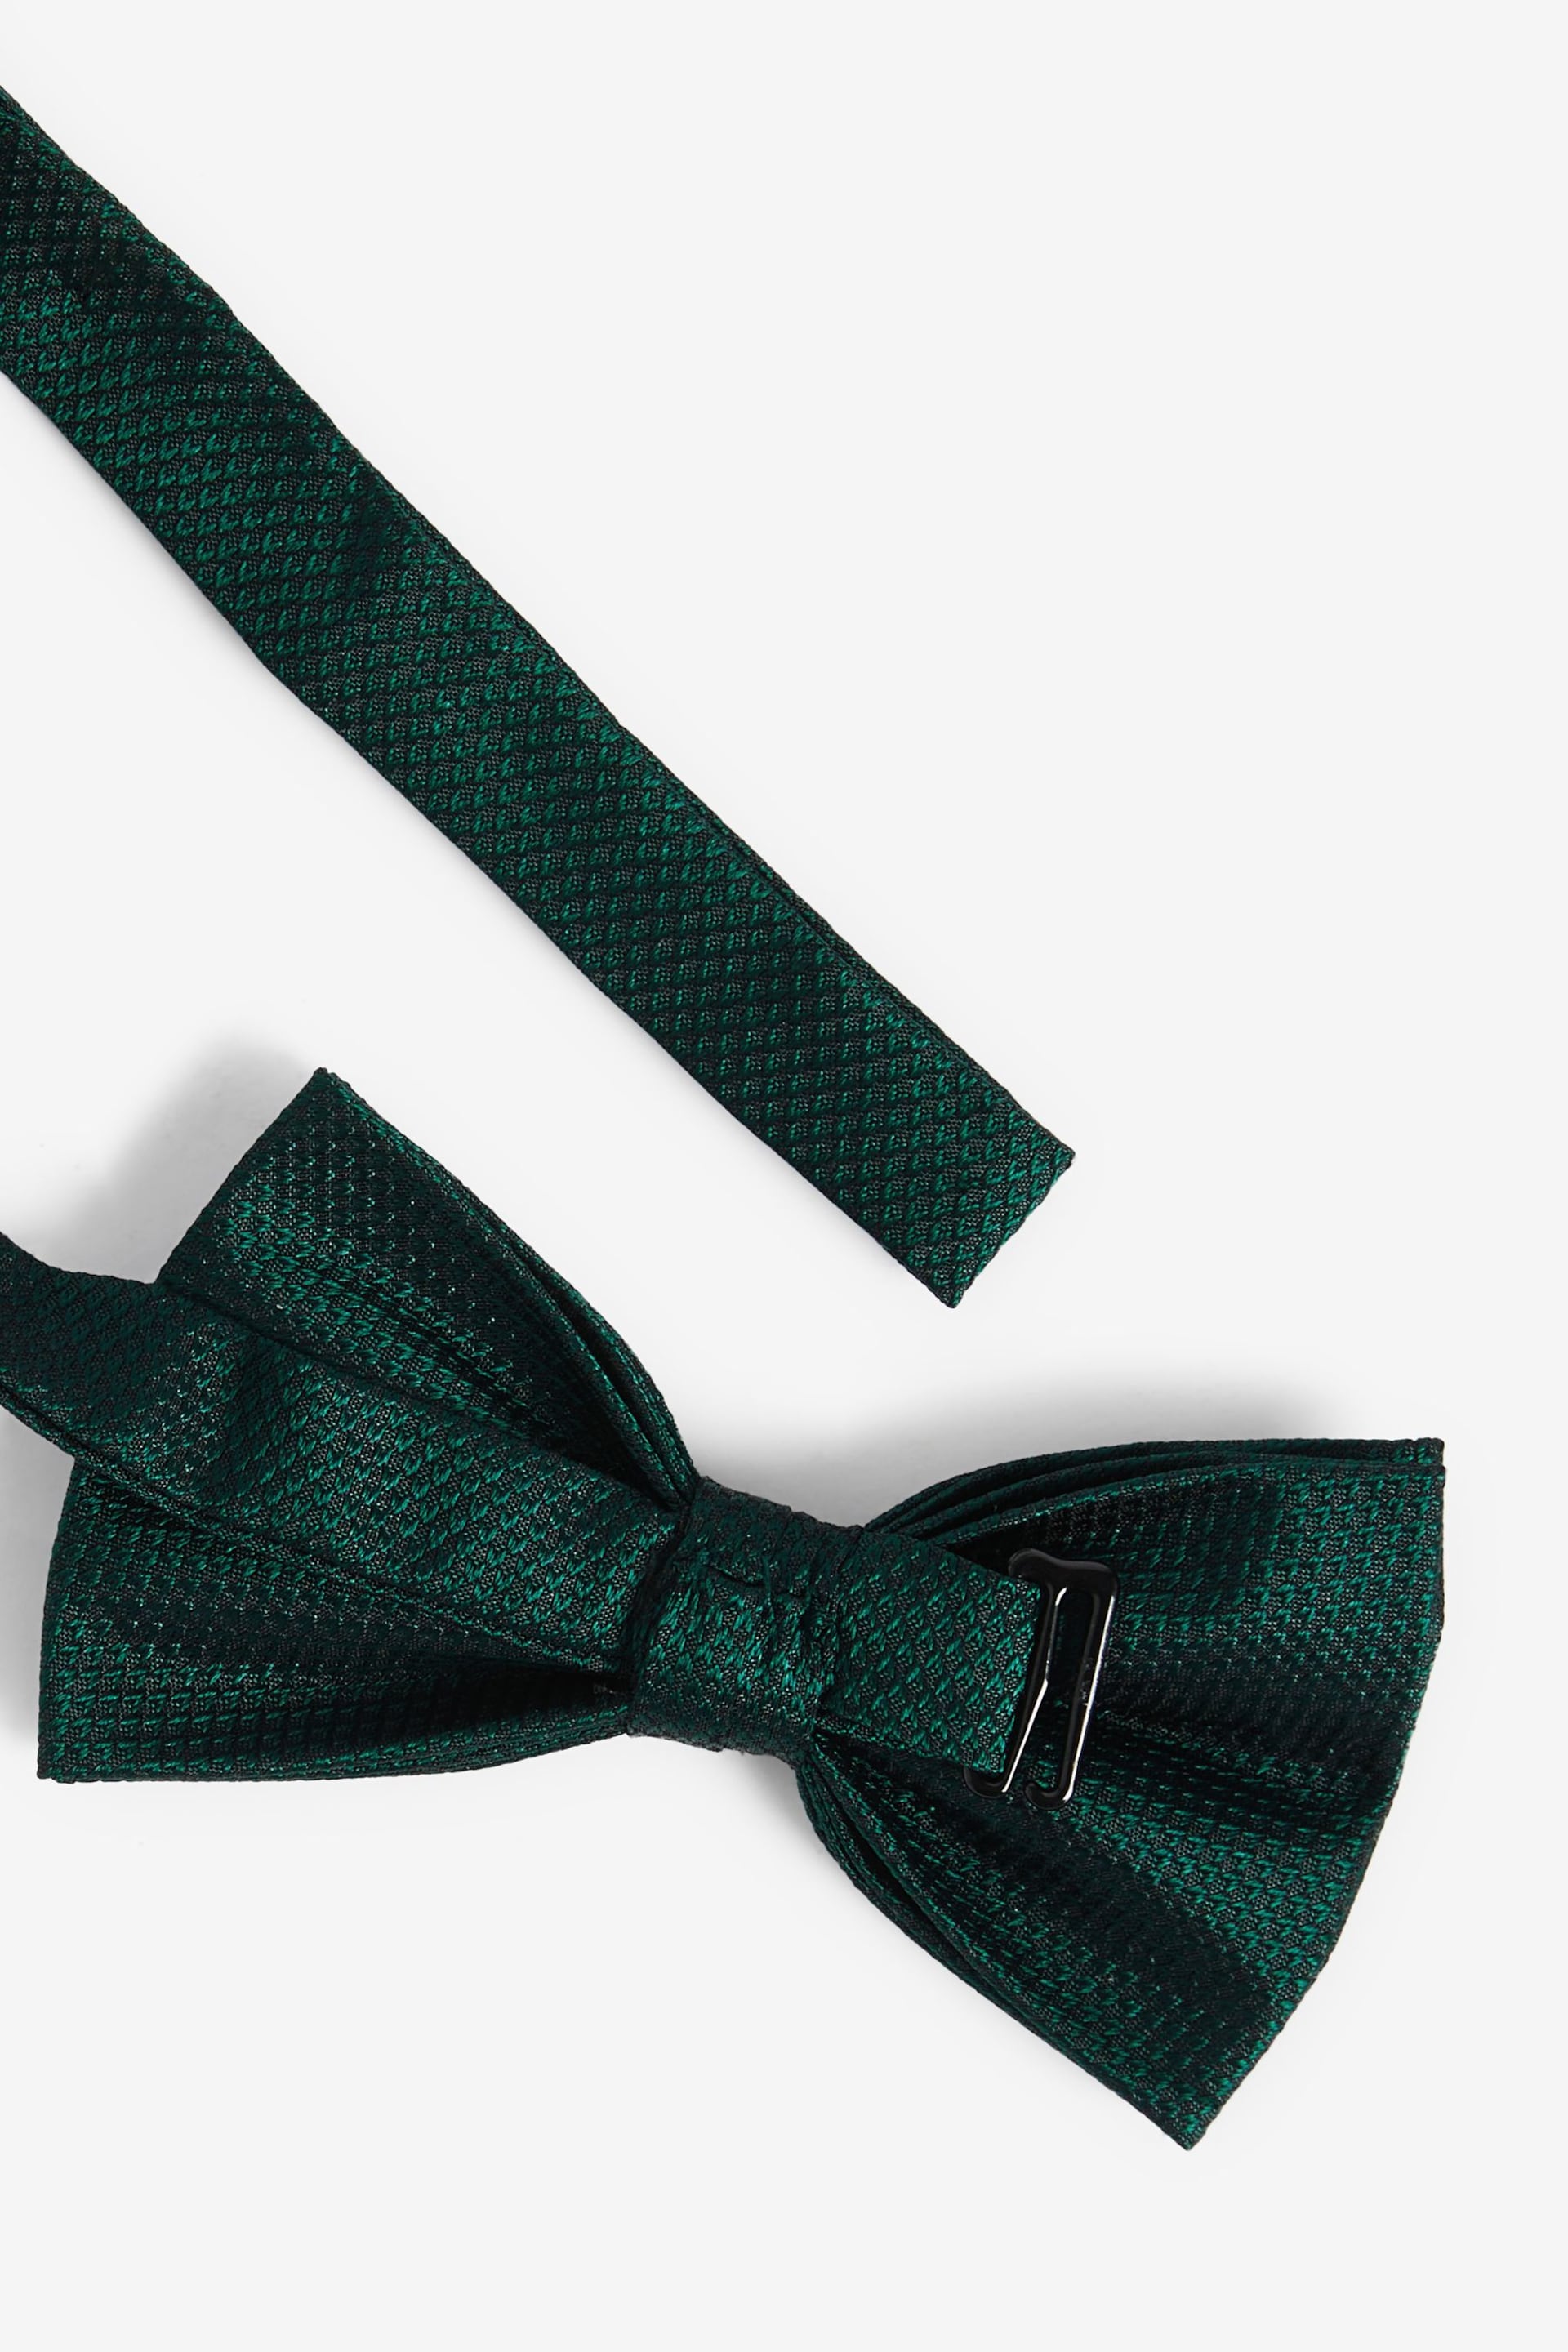 Forest Green Textured Silk Bow Tie - Image 3 of 4